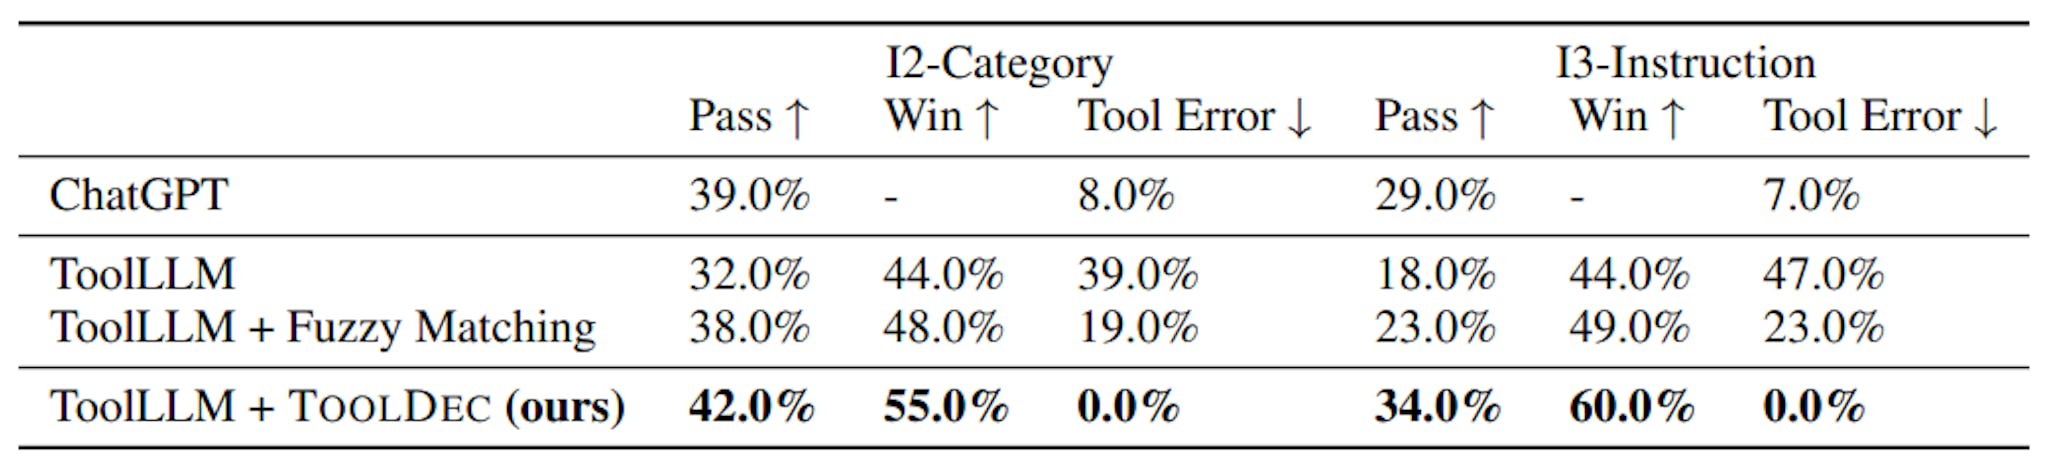 Table 3: Results on ToolEval. TOOLDEC-enhanced ToolLLM outperformed baselines ToolLLM in all metrics. TOOLDEC eliminated all tool errors and was even able to beat ChatGPT slightly.